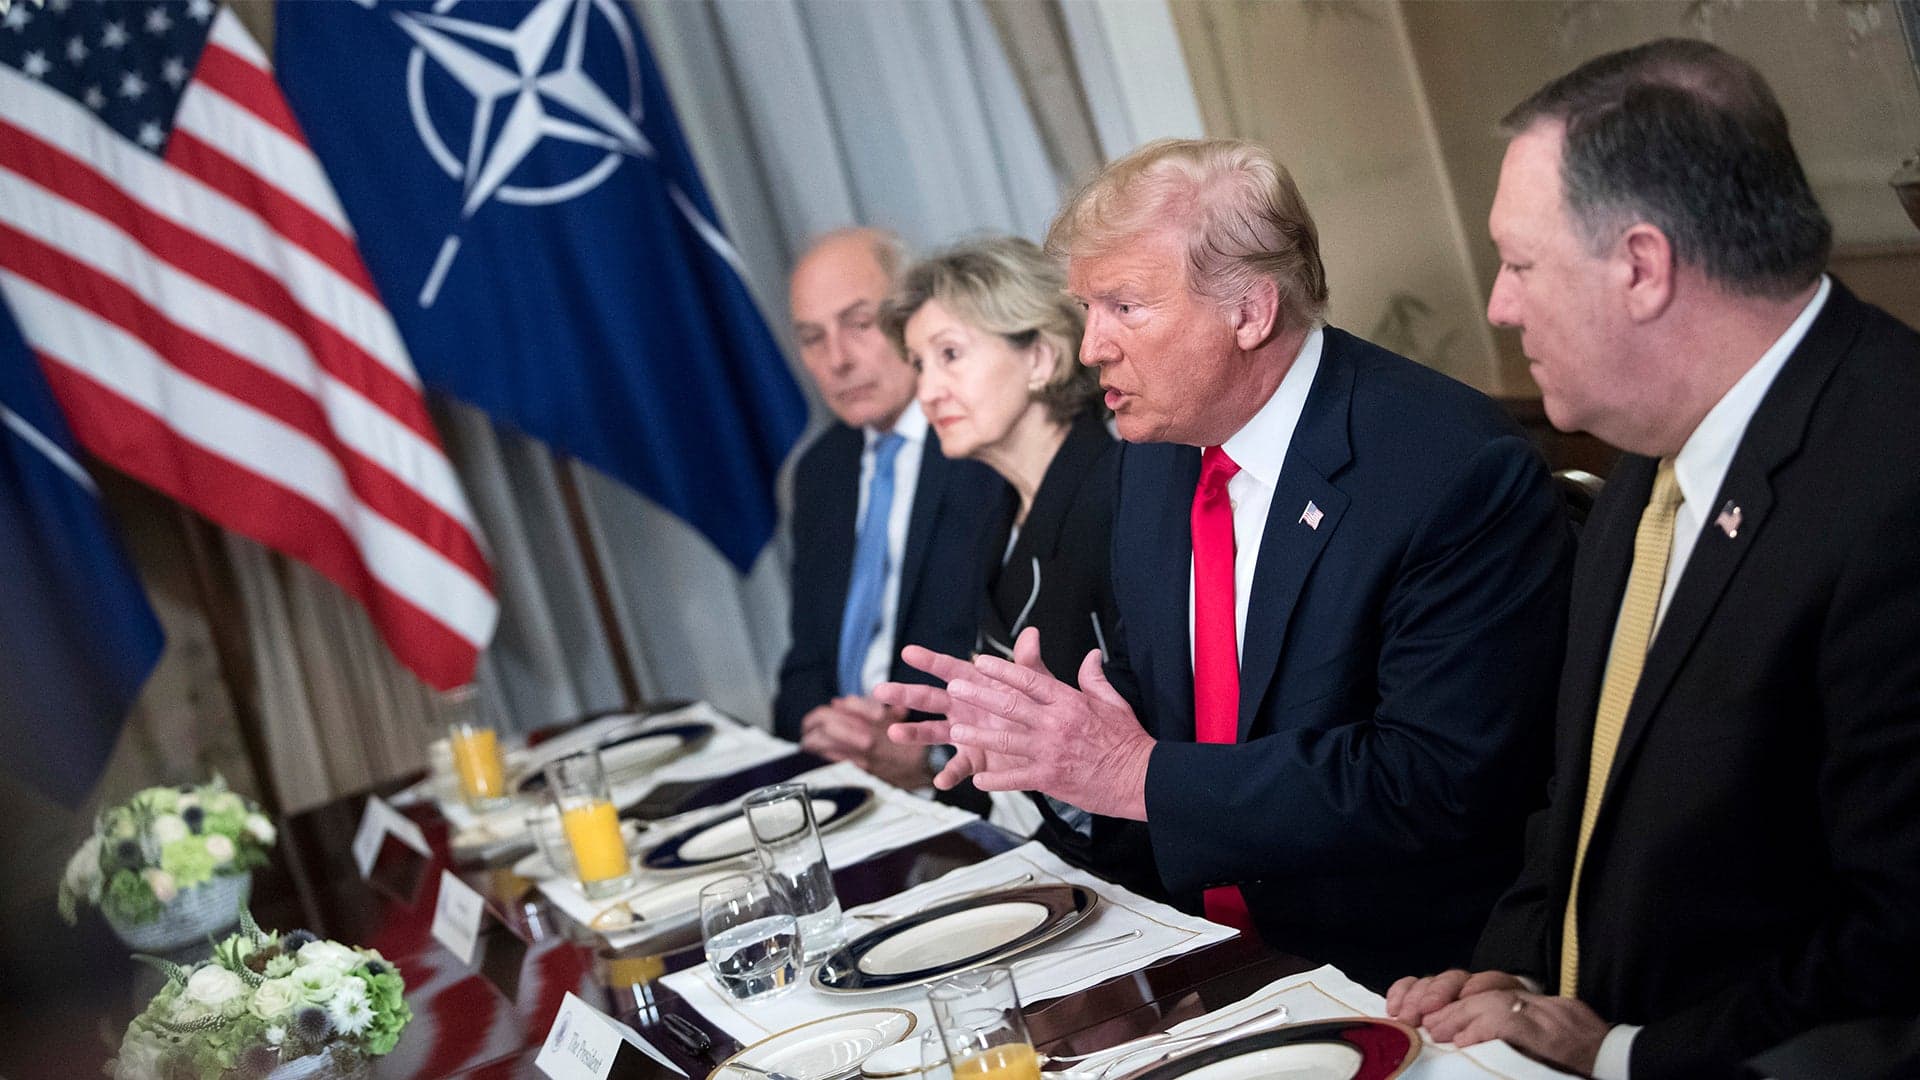 It’s Not What Trump Said About Germany At The NATO Summit, It’s How He Said It